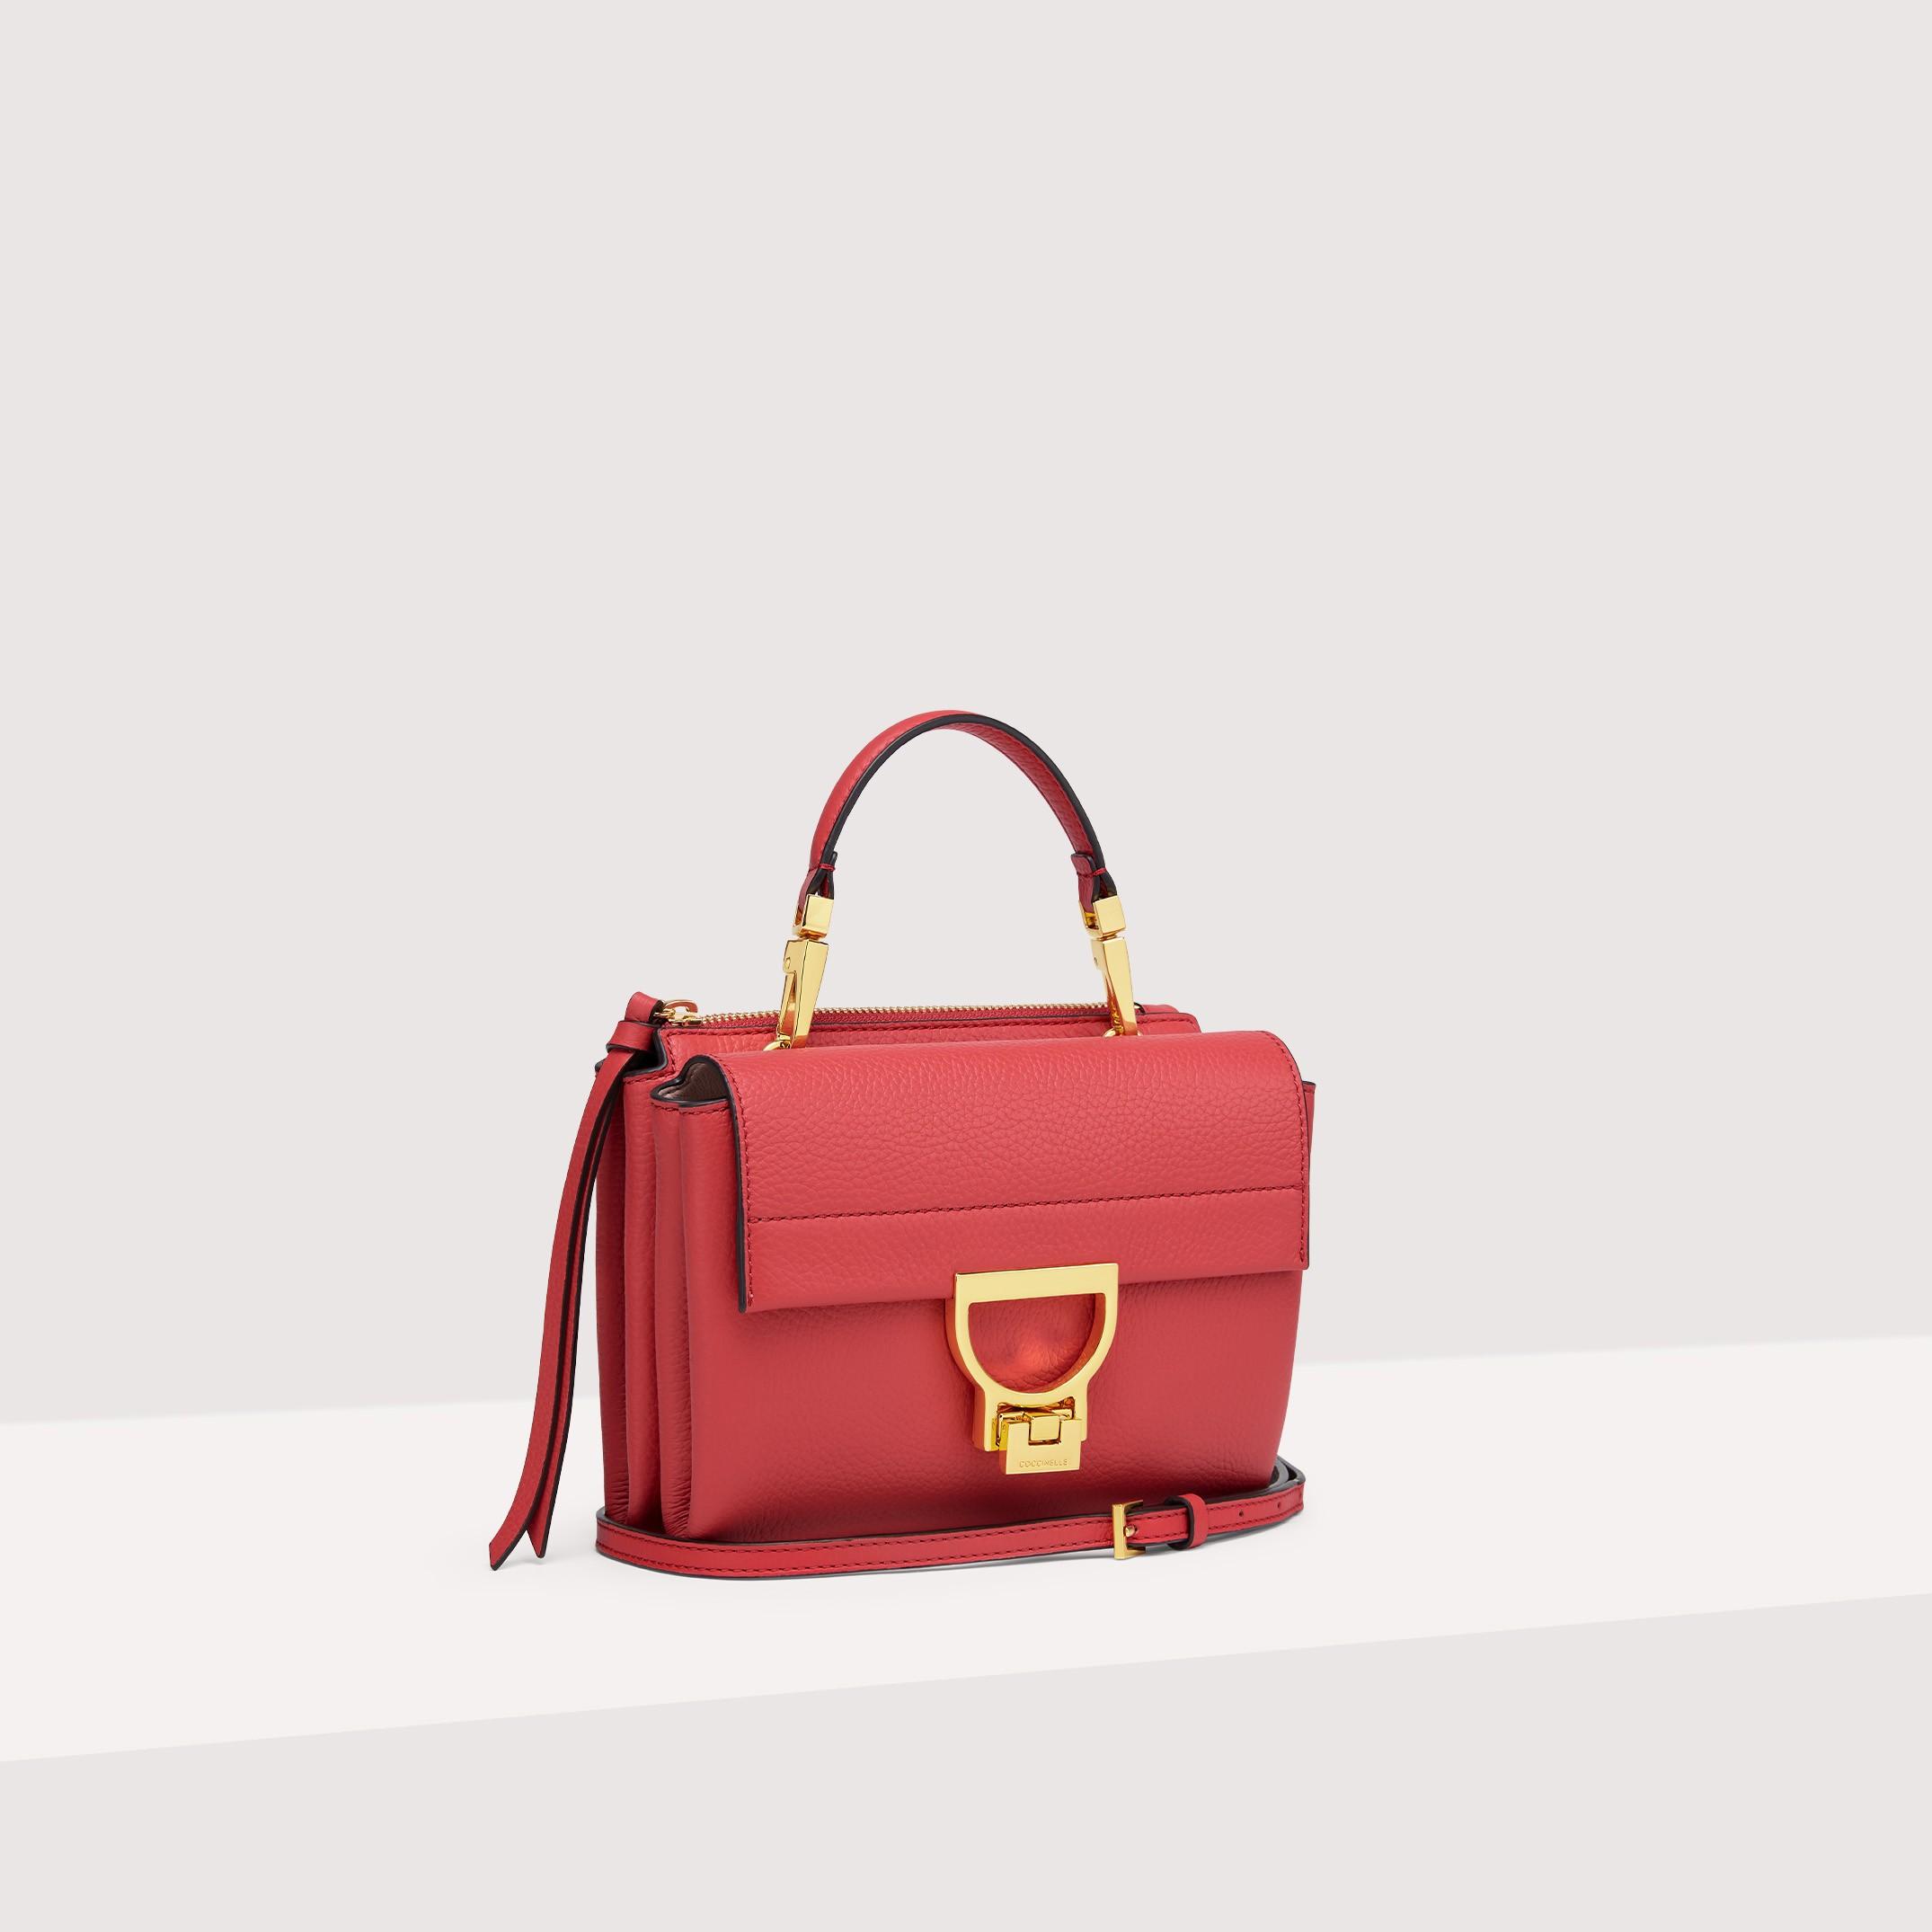 Coccinelle Grained Leather Handbag Arlettis Small in Red | Lyst